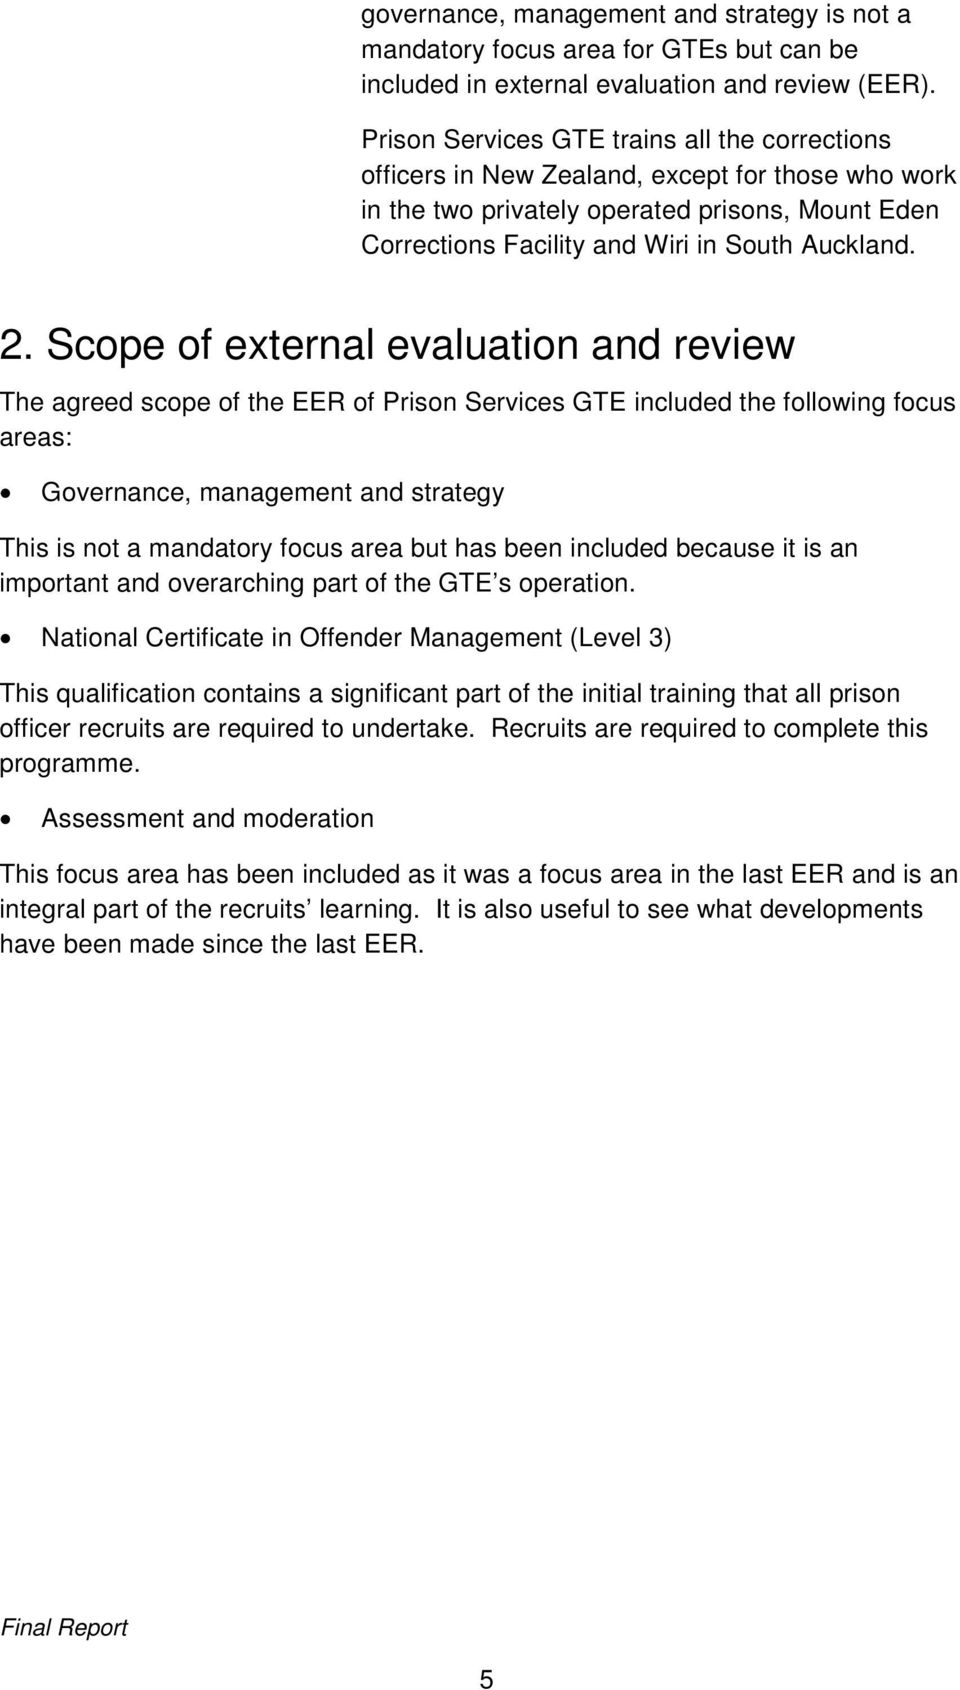 Scope of external evaluation and review The agreed scope of the EER of Prison Services GTE included the following focus areas: Governance, management and strategy This is not a mandatory focus area